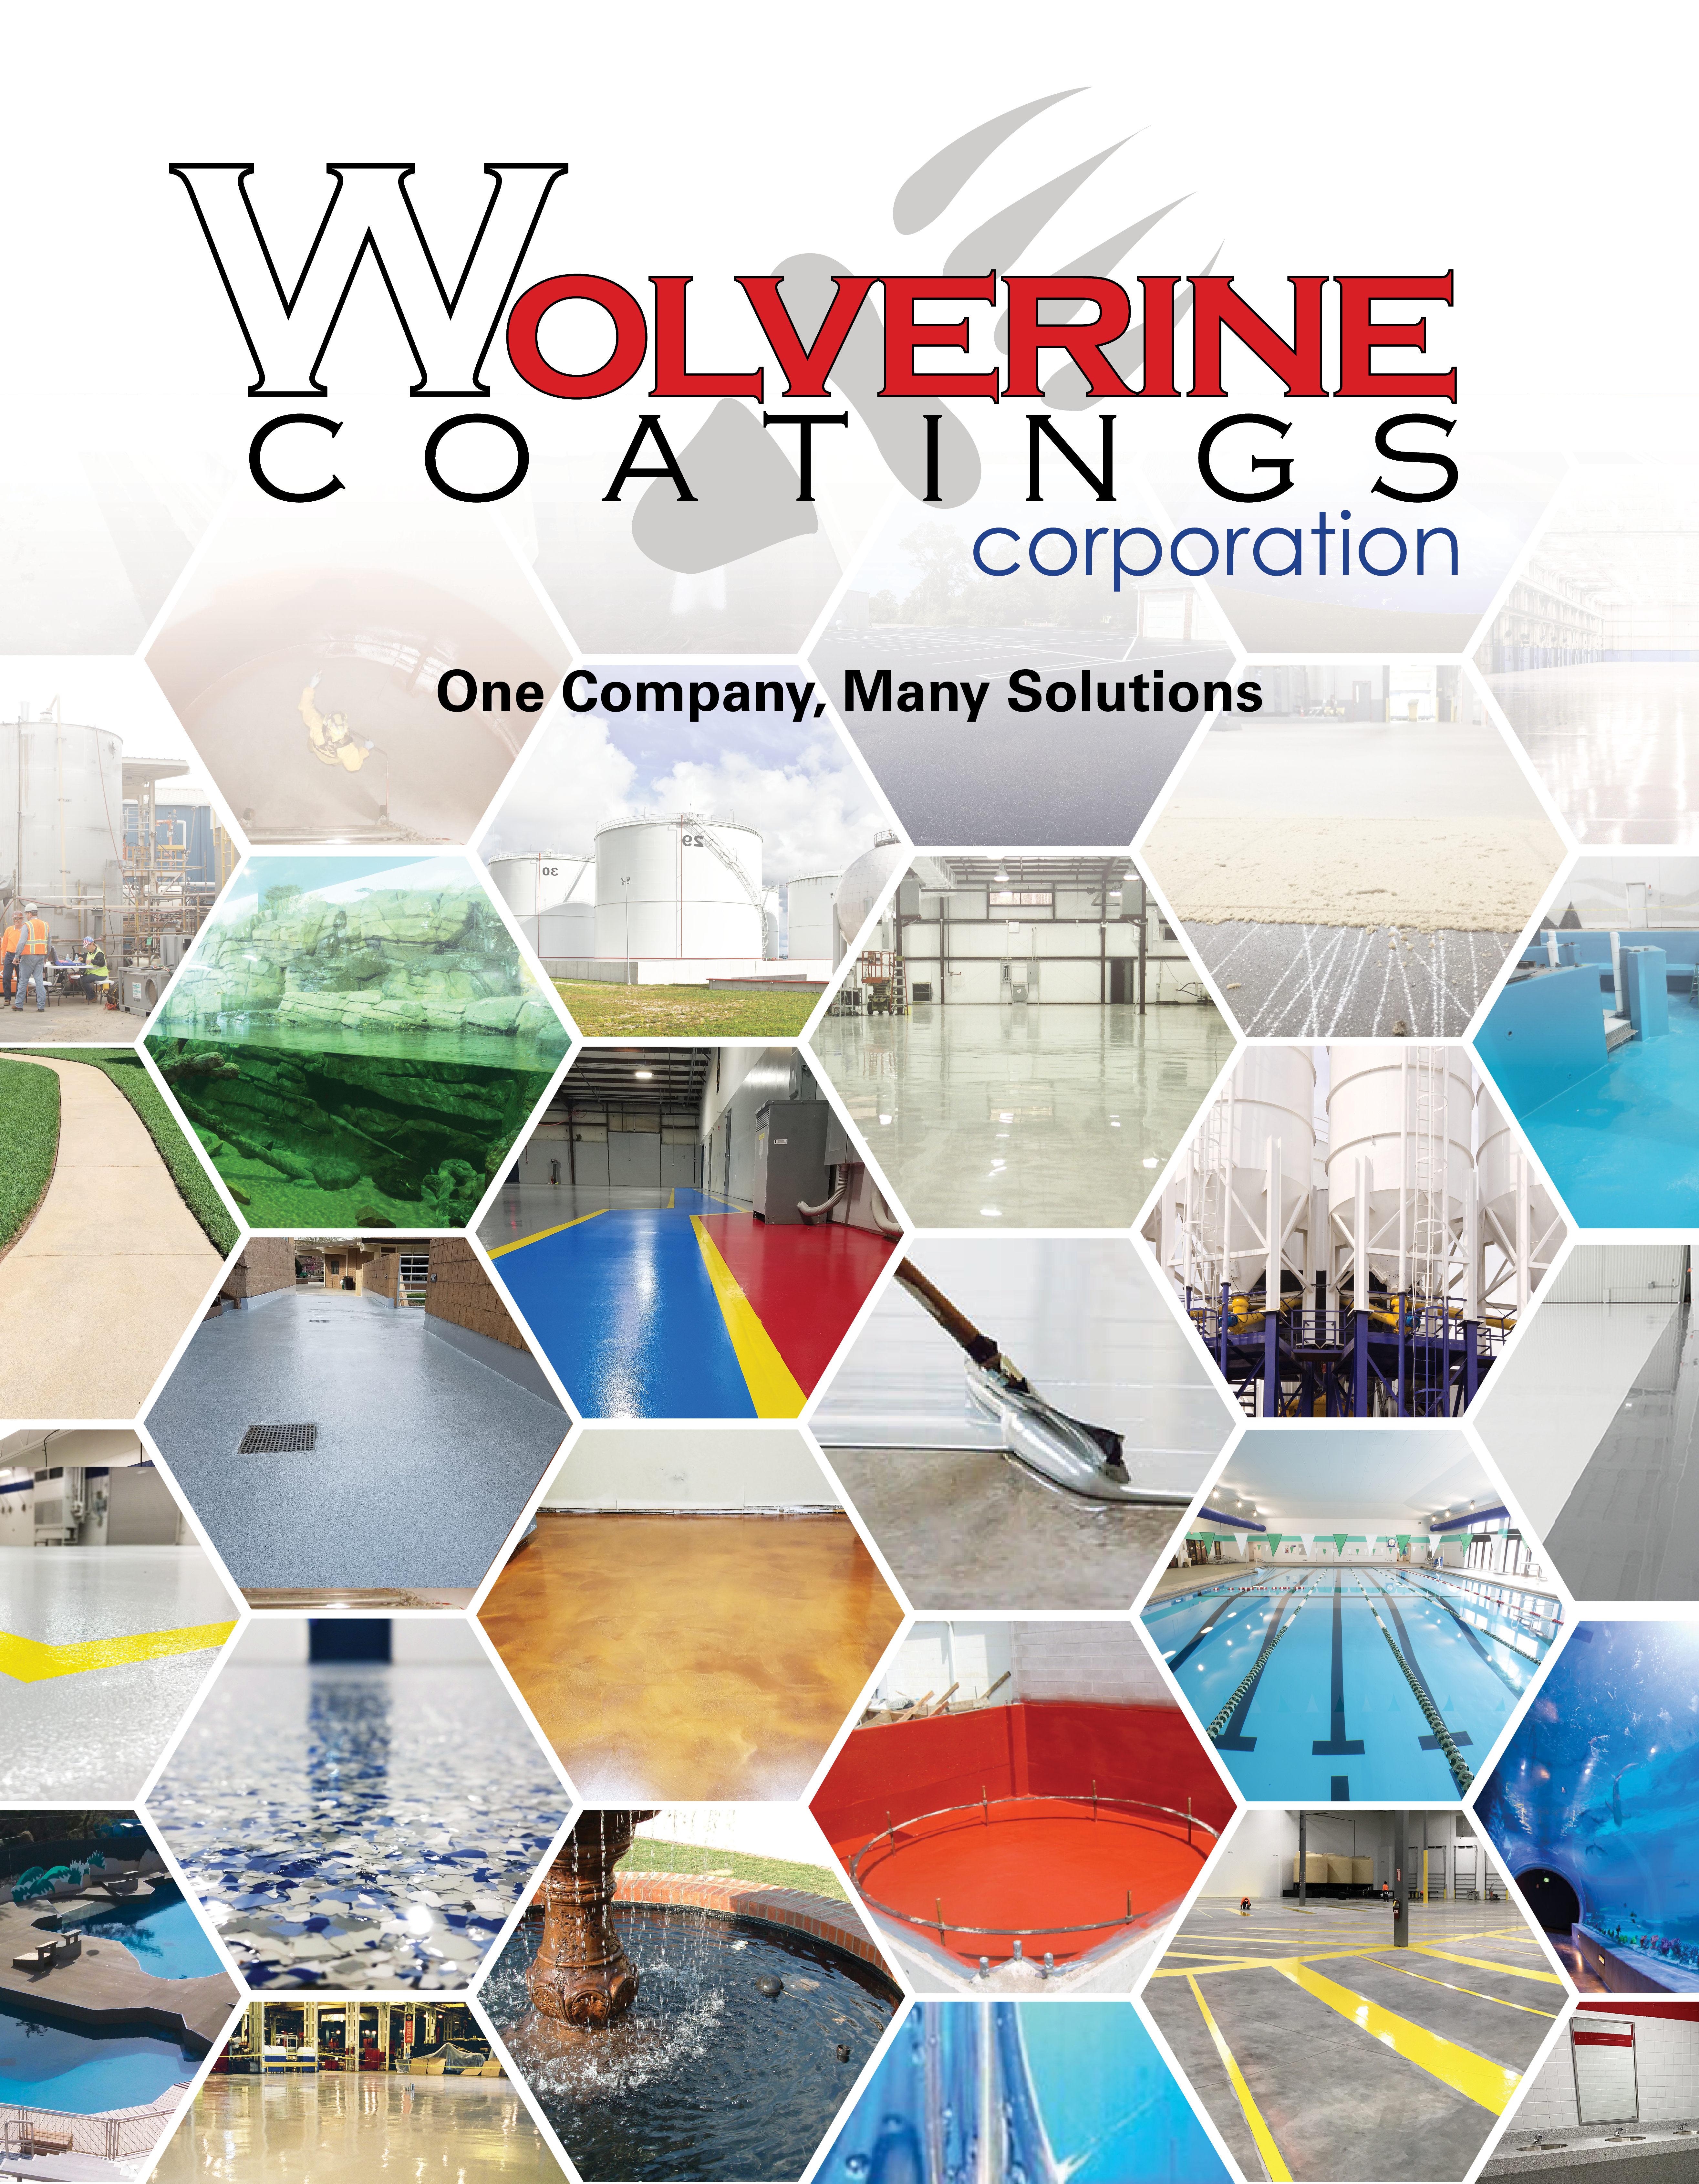 Company Overview - Wolverine Coatings Corporation: Coatings Manufacturer, Spartanburg, SC